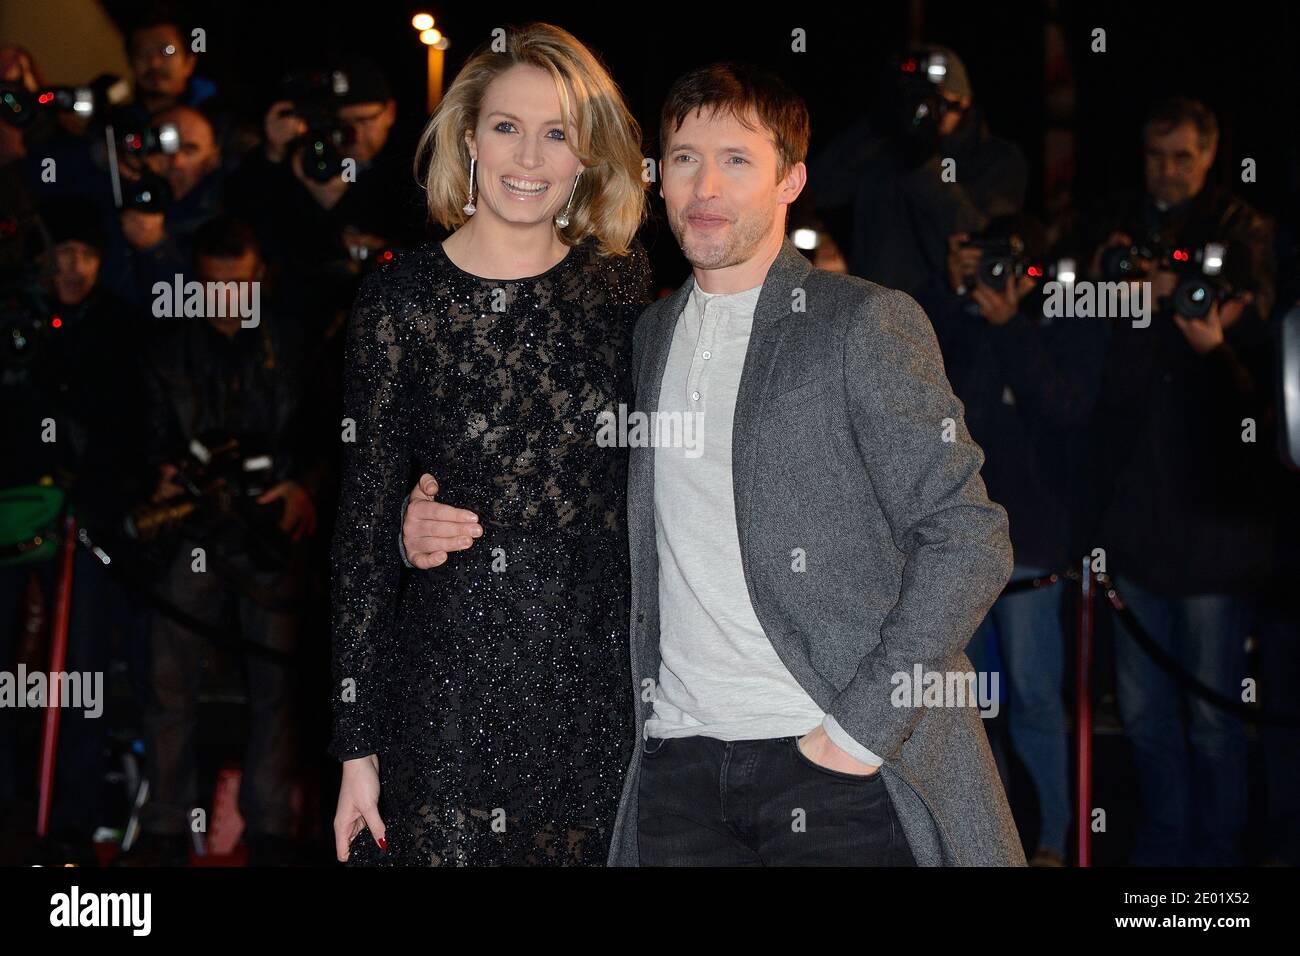 James Blunt and Sofia Wellesley attending the 15th NRJ Music Awards ...